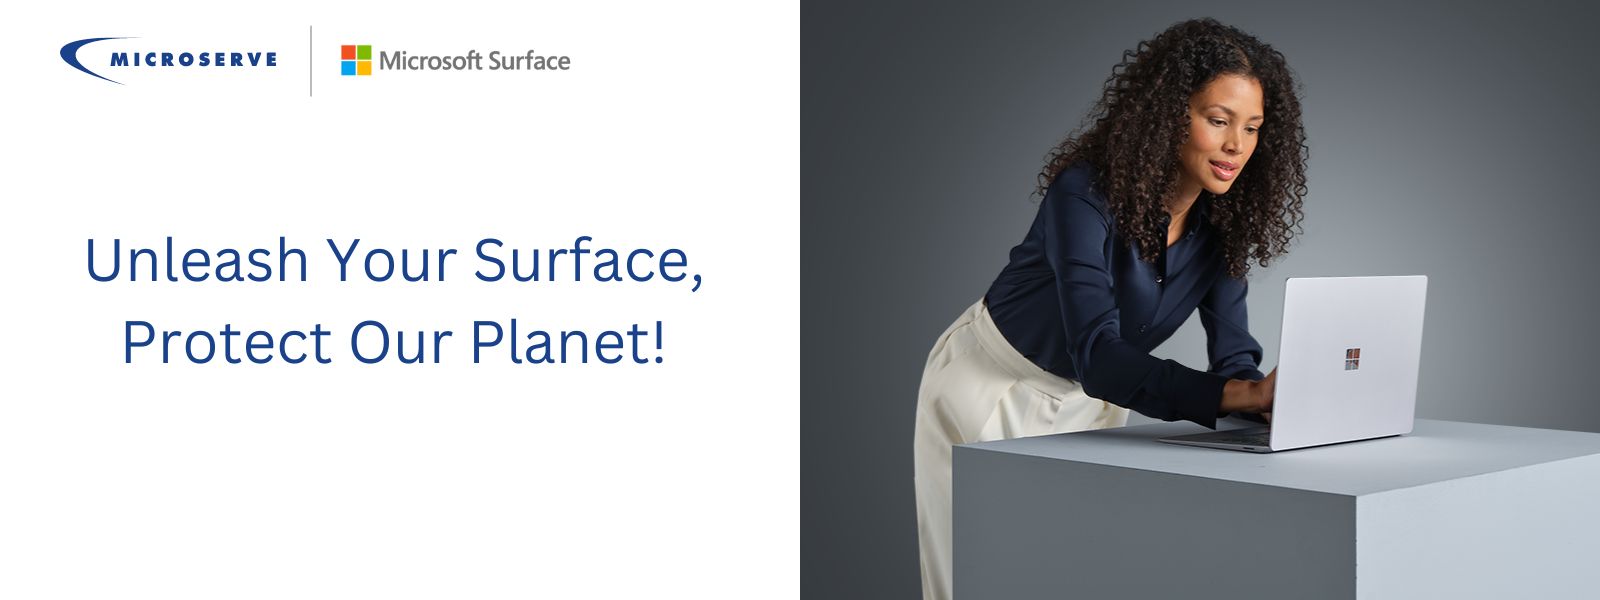 Banner showing a woman using a Microsoft Surface. The text "Unleash Your Surface, Protect Our Planet" is beside the image